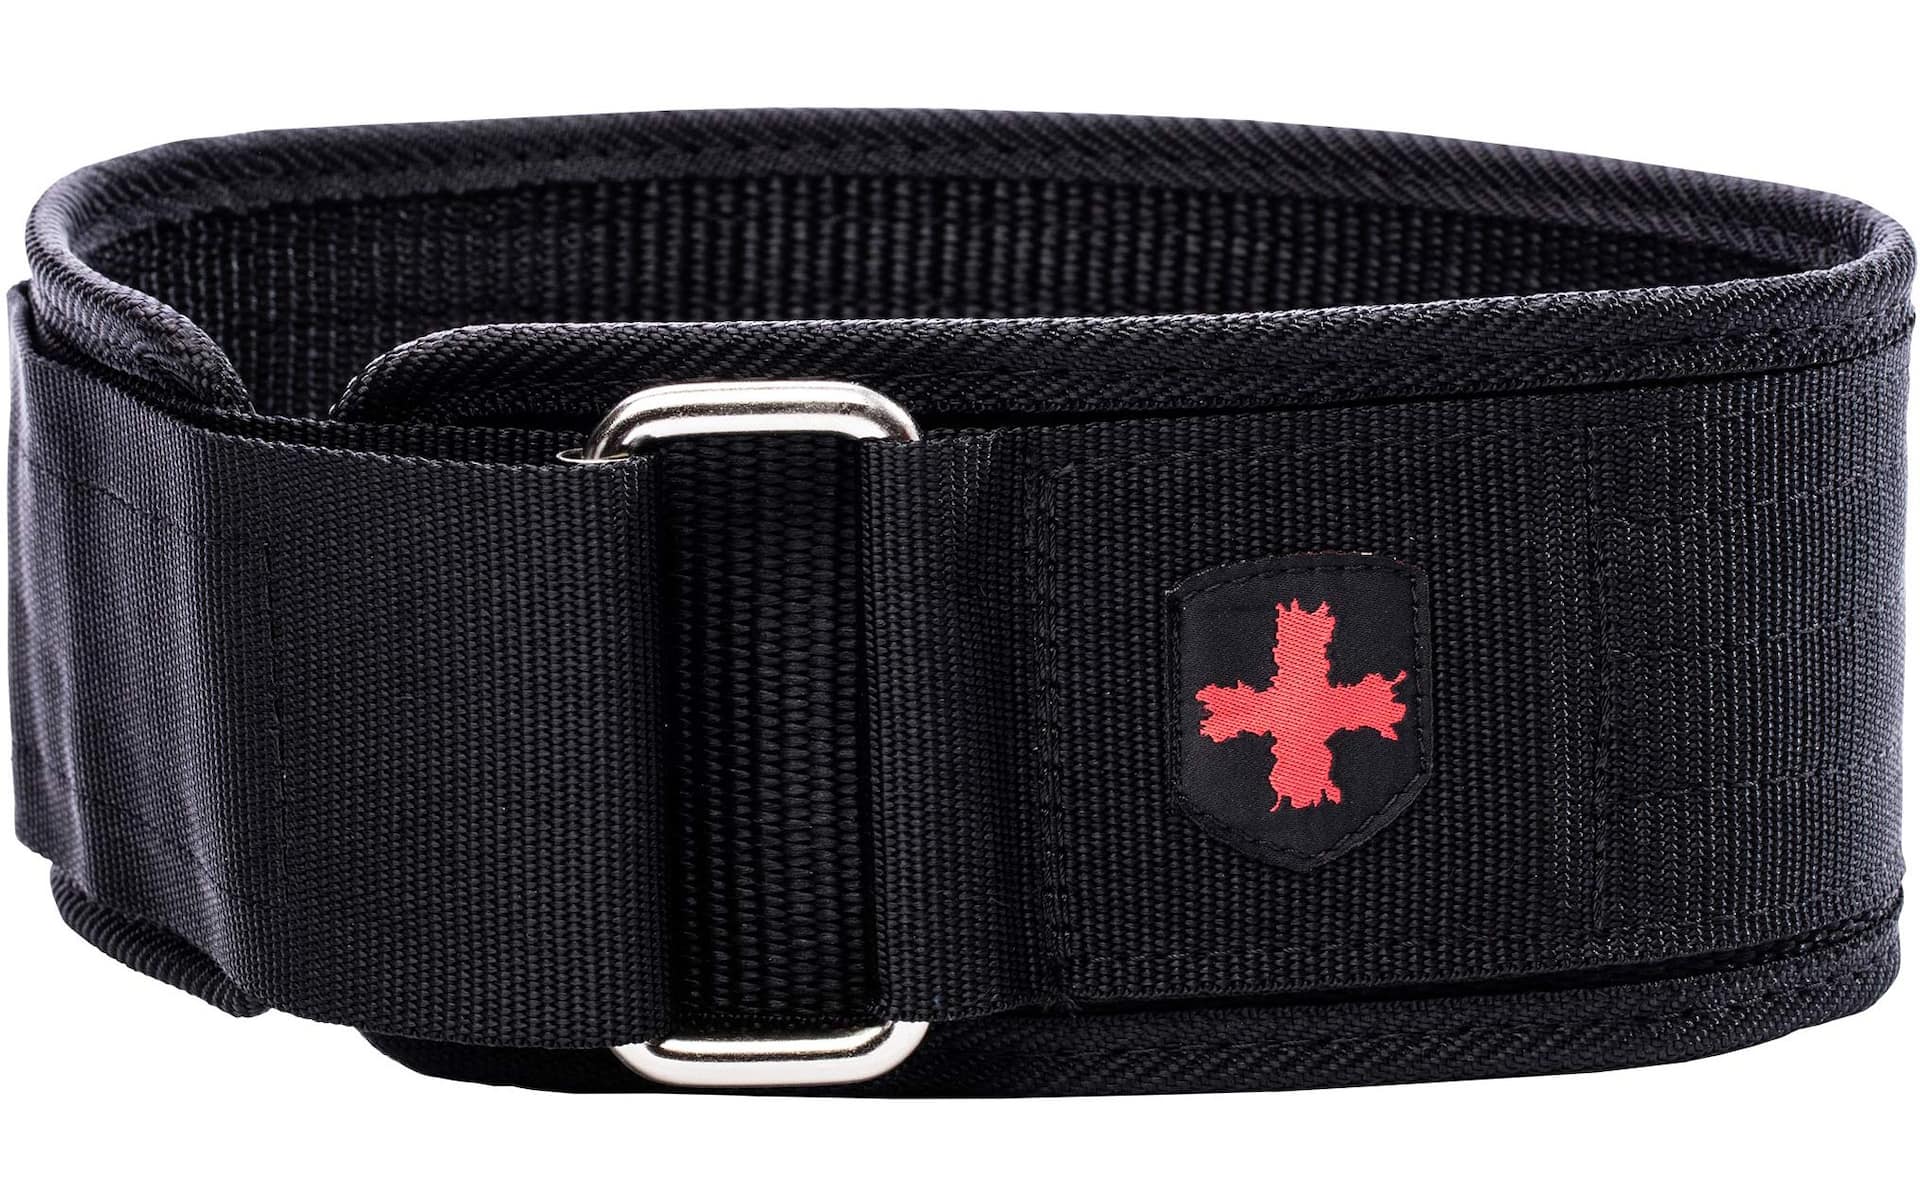 https://media-www.canadiantire.ca/product/playing/exercise/exercise-accessories/1840709/harbinger-4-nylon-weightlifting-belt-medium-e7d0ae01-691f-4ca0-b391-ccfe87aebf43-jpgrendition.jpg